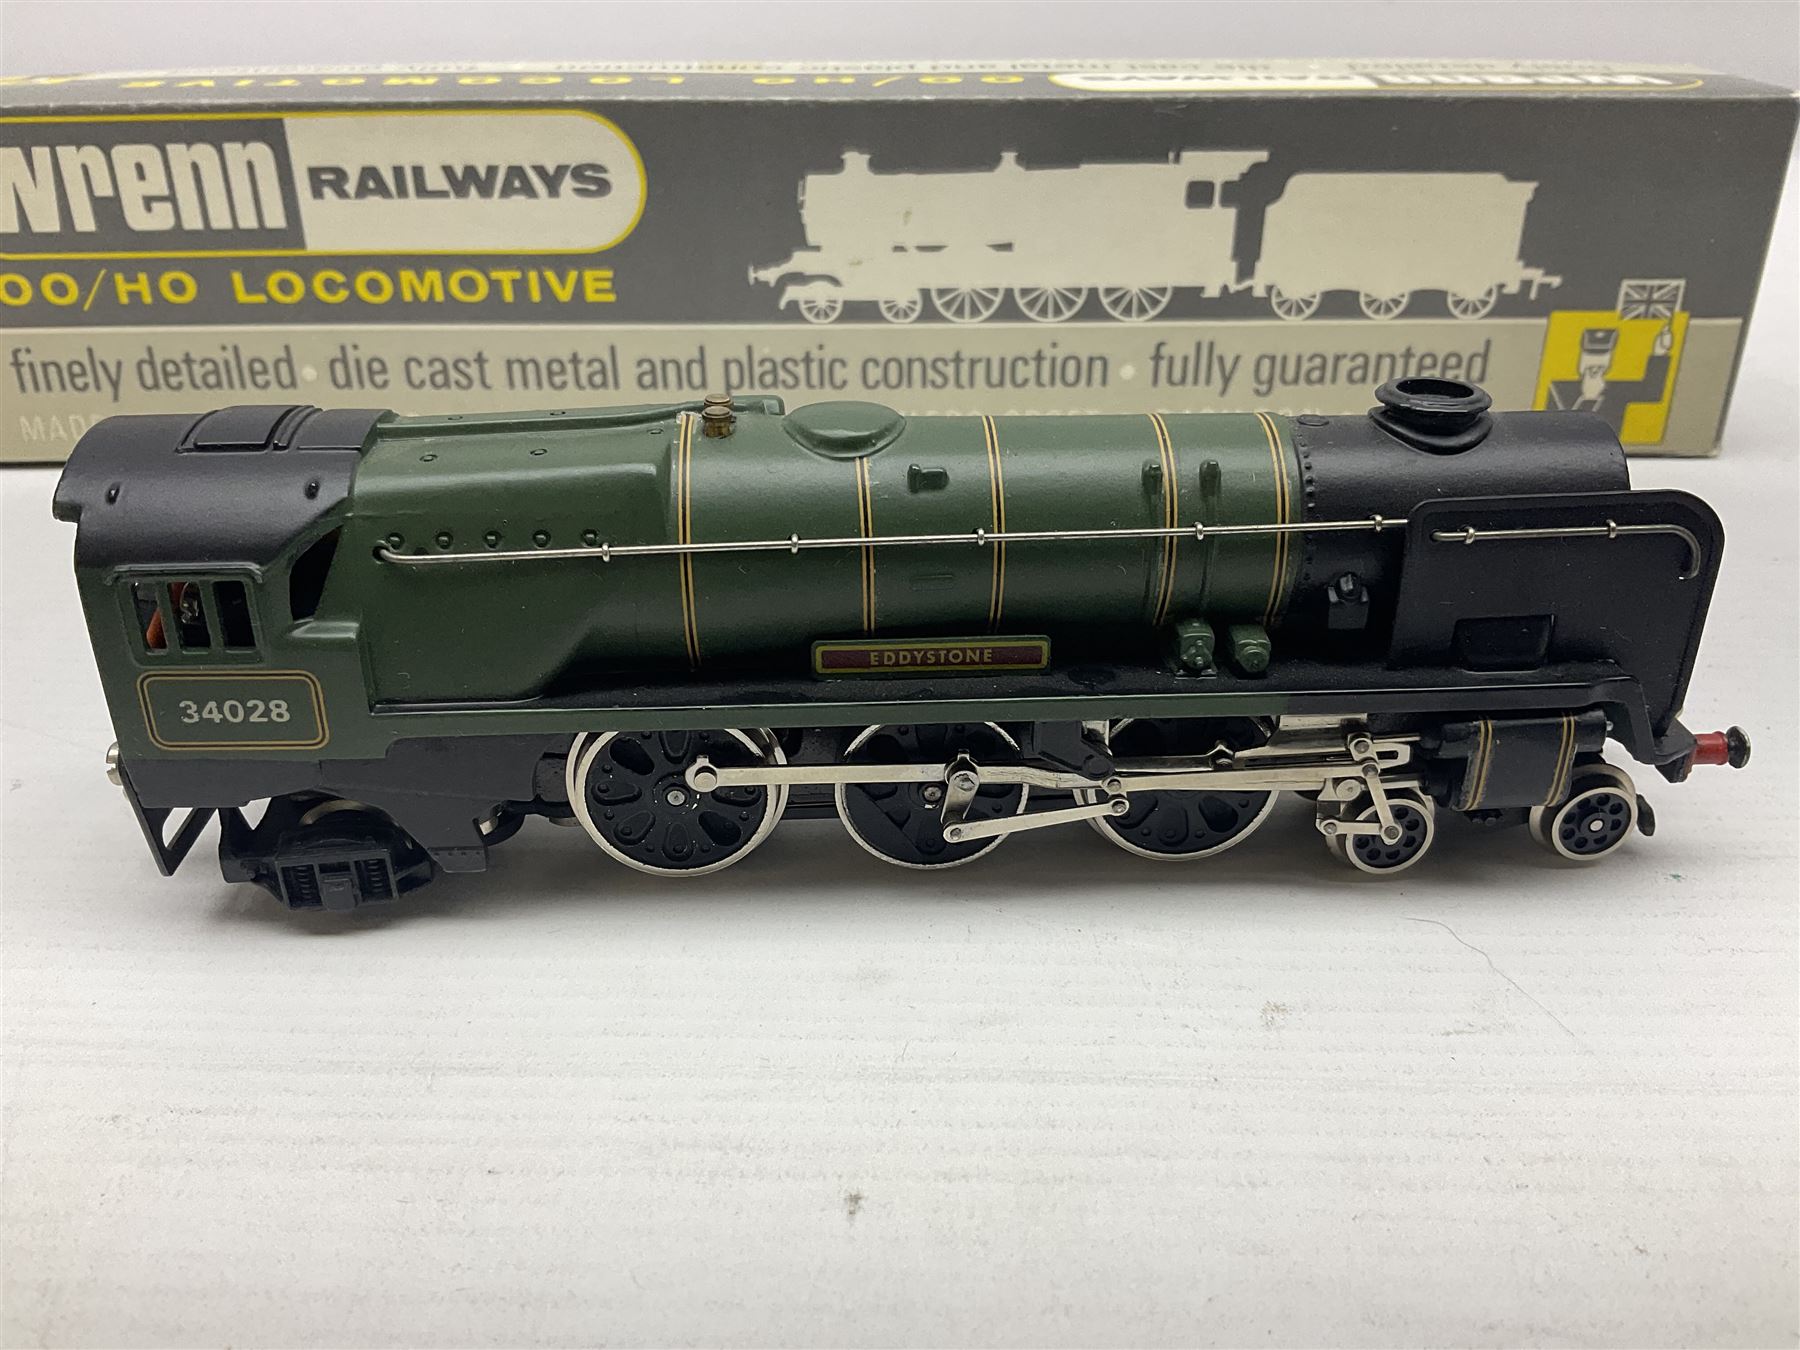 Wrenn '00' gauge - Rebuilt Bulleid Pacific 4-6-2 locomotive 'Eddystone' No.34028 in BR Green with ce - Image 13 of 14